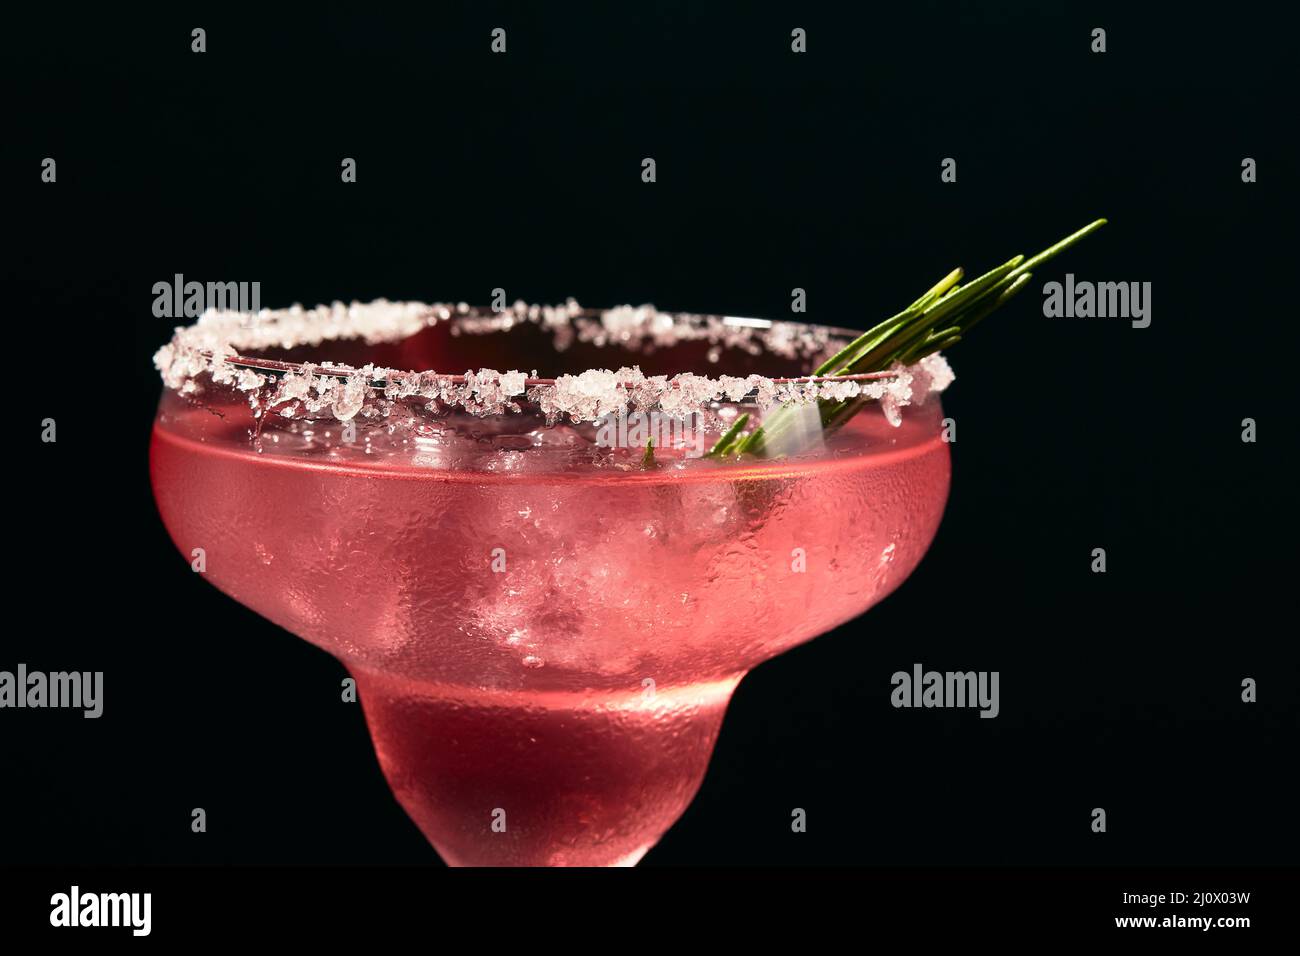 Alcoholic or non-alcoholic rosemary cocktail such as margarita, cosmopolitan or similar on a dark marble table Stock Photo